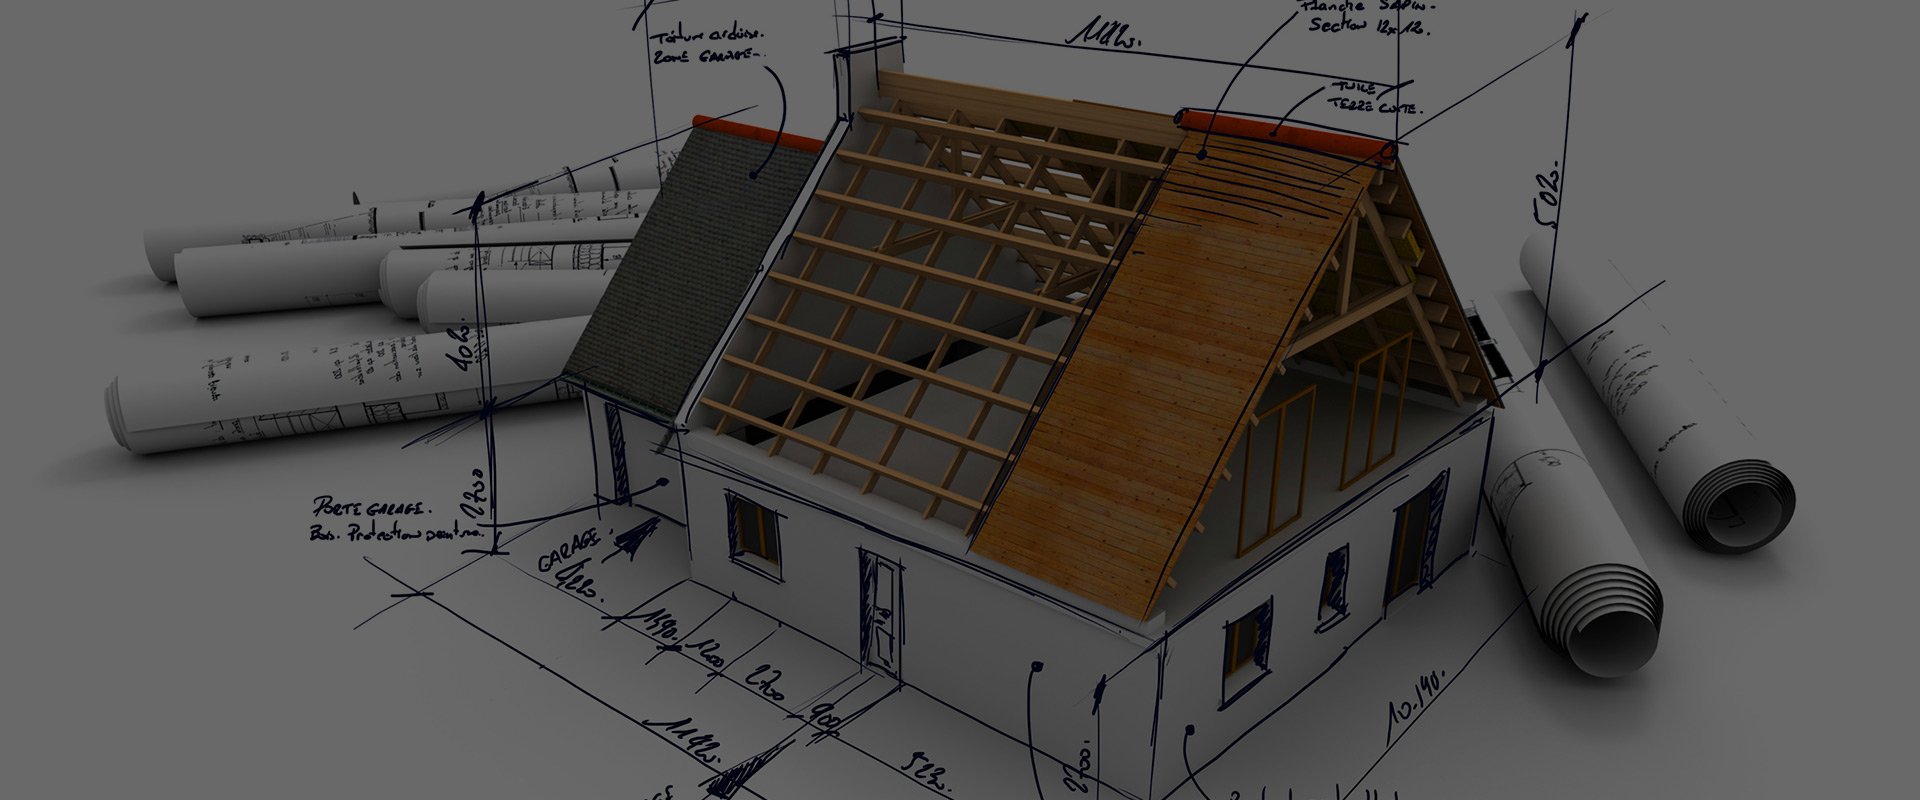 Roofing company plans & blueprints